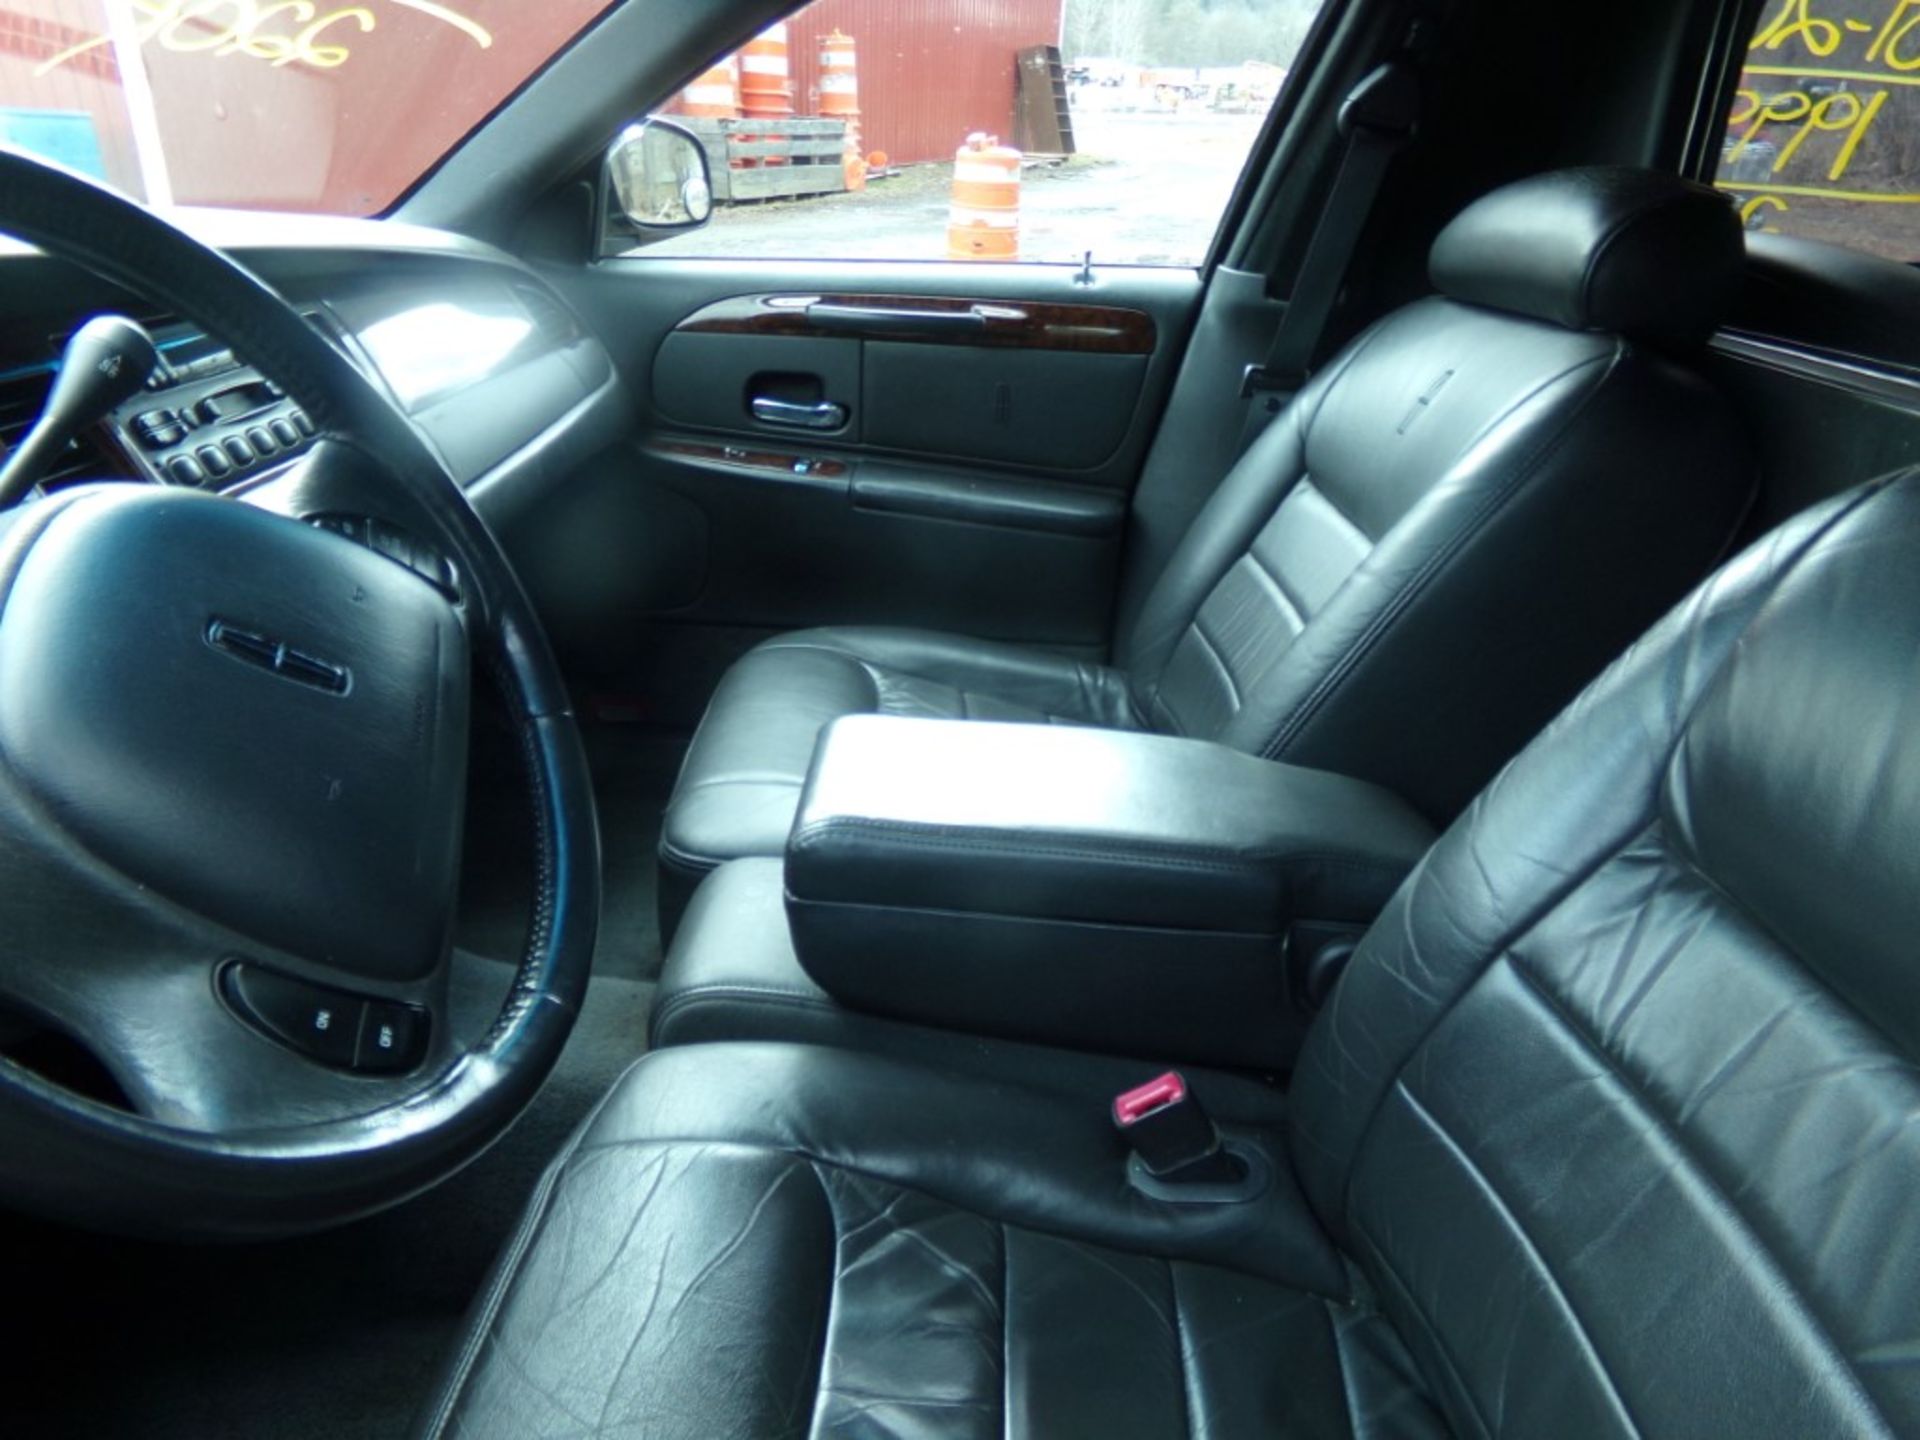 1999 Lincoln Town Car Executive (Limo), Leather, This Vehicle is a Limosine, Black, 220,606 Miles, - Bild 5 aus 8